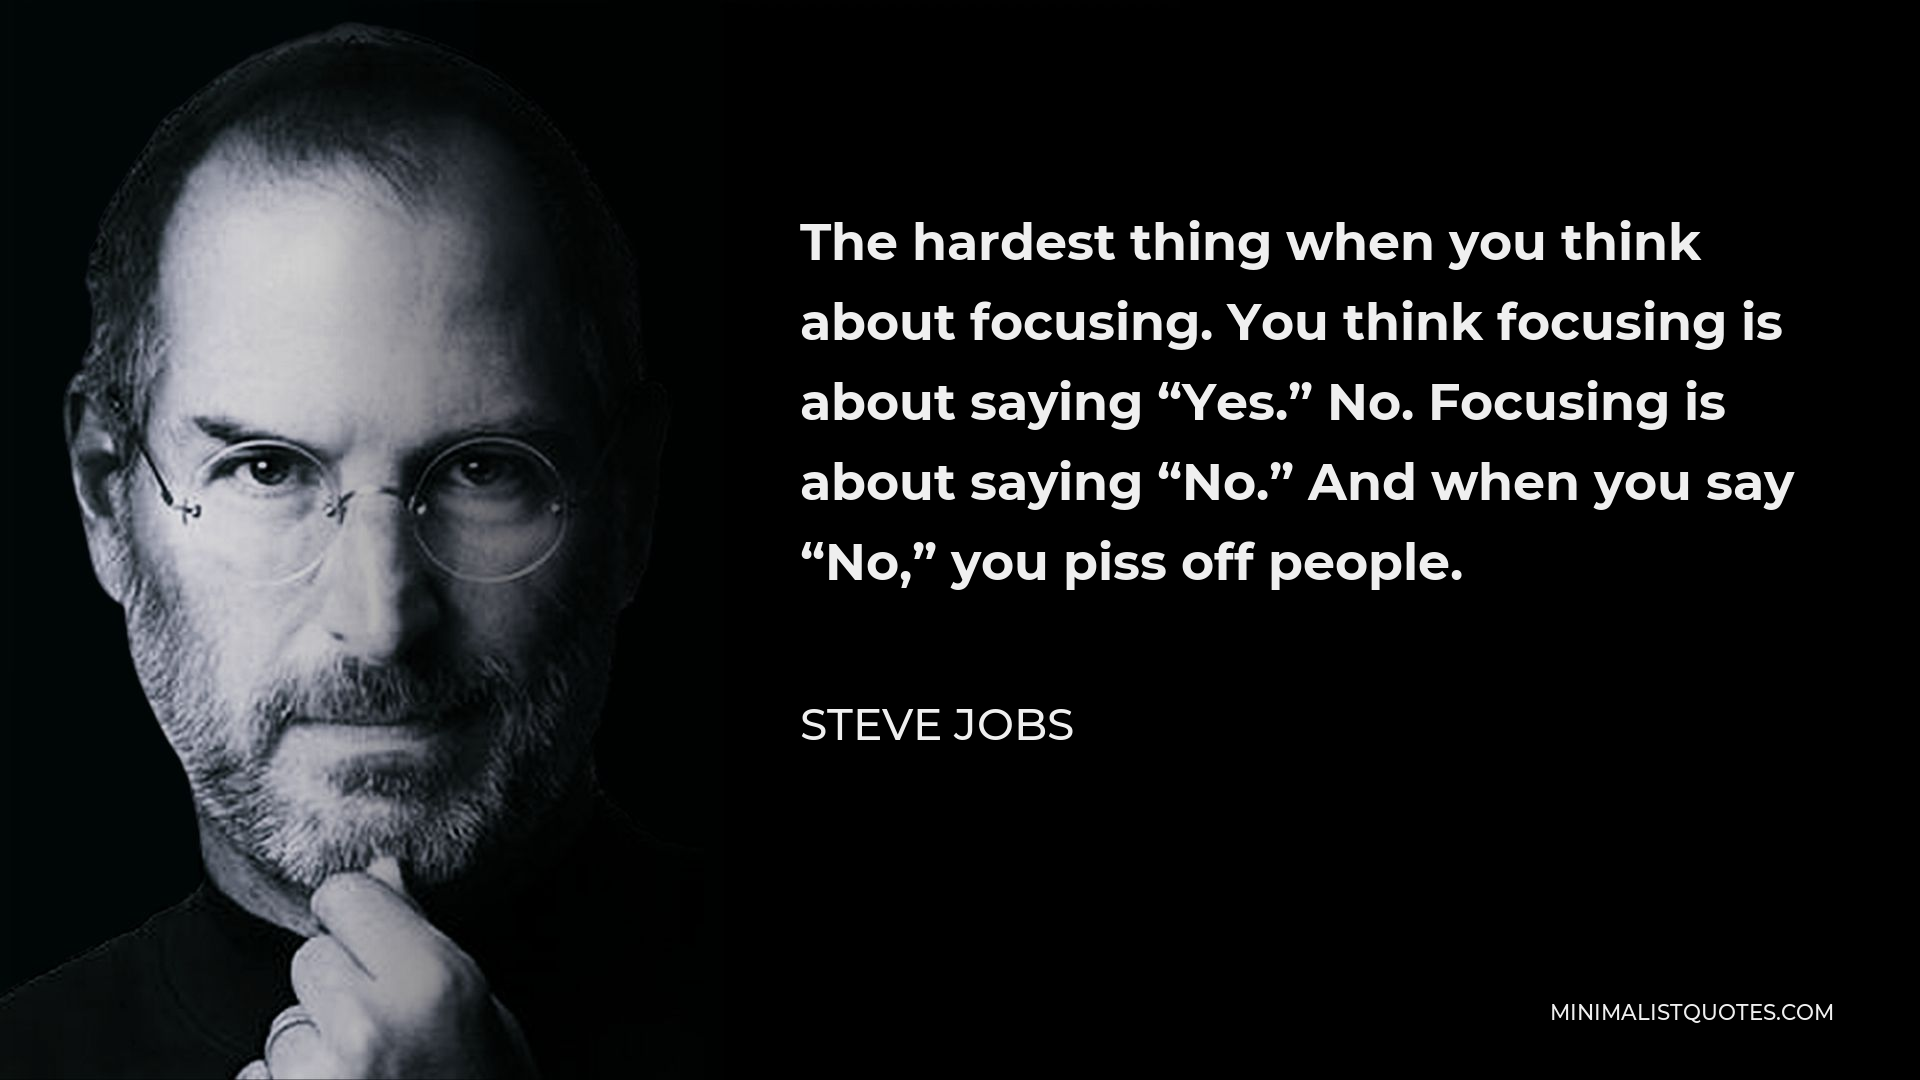 Steve Jobs Quote - The hardest thing when you think about focusing. You think focusing is about saying “Yes.” No. Focusing is about saying “No.” And when you say “No,” you piss off people.